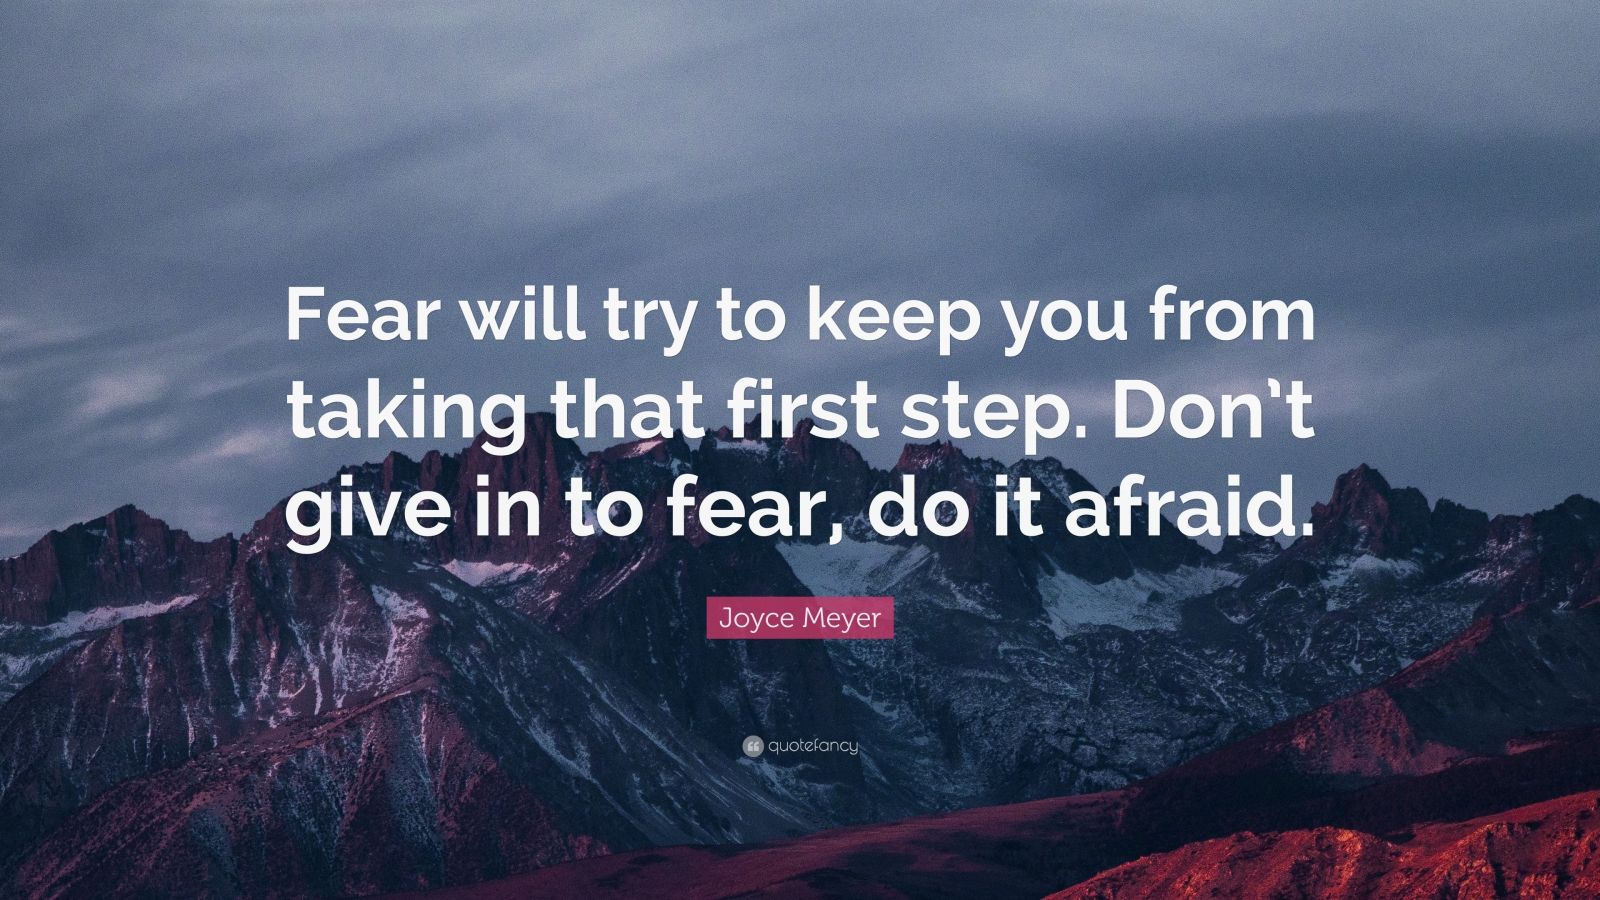 Joyce Meyer Quote: “Fear will try to keep you from taking that first ...